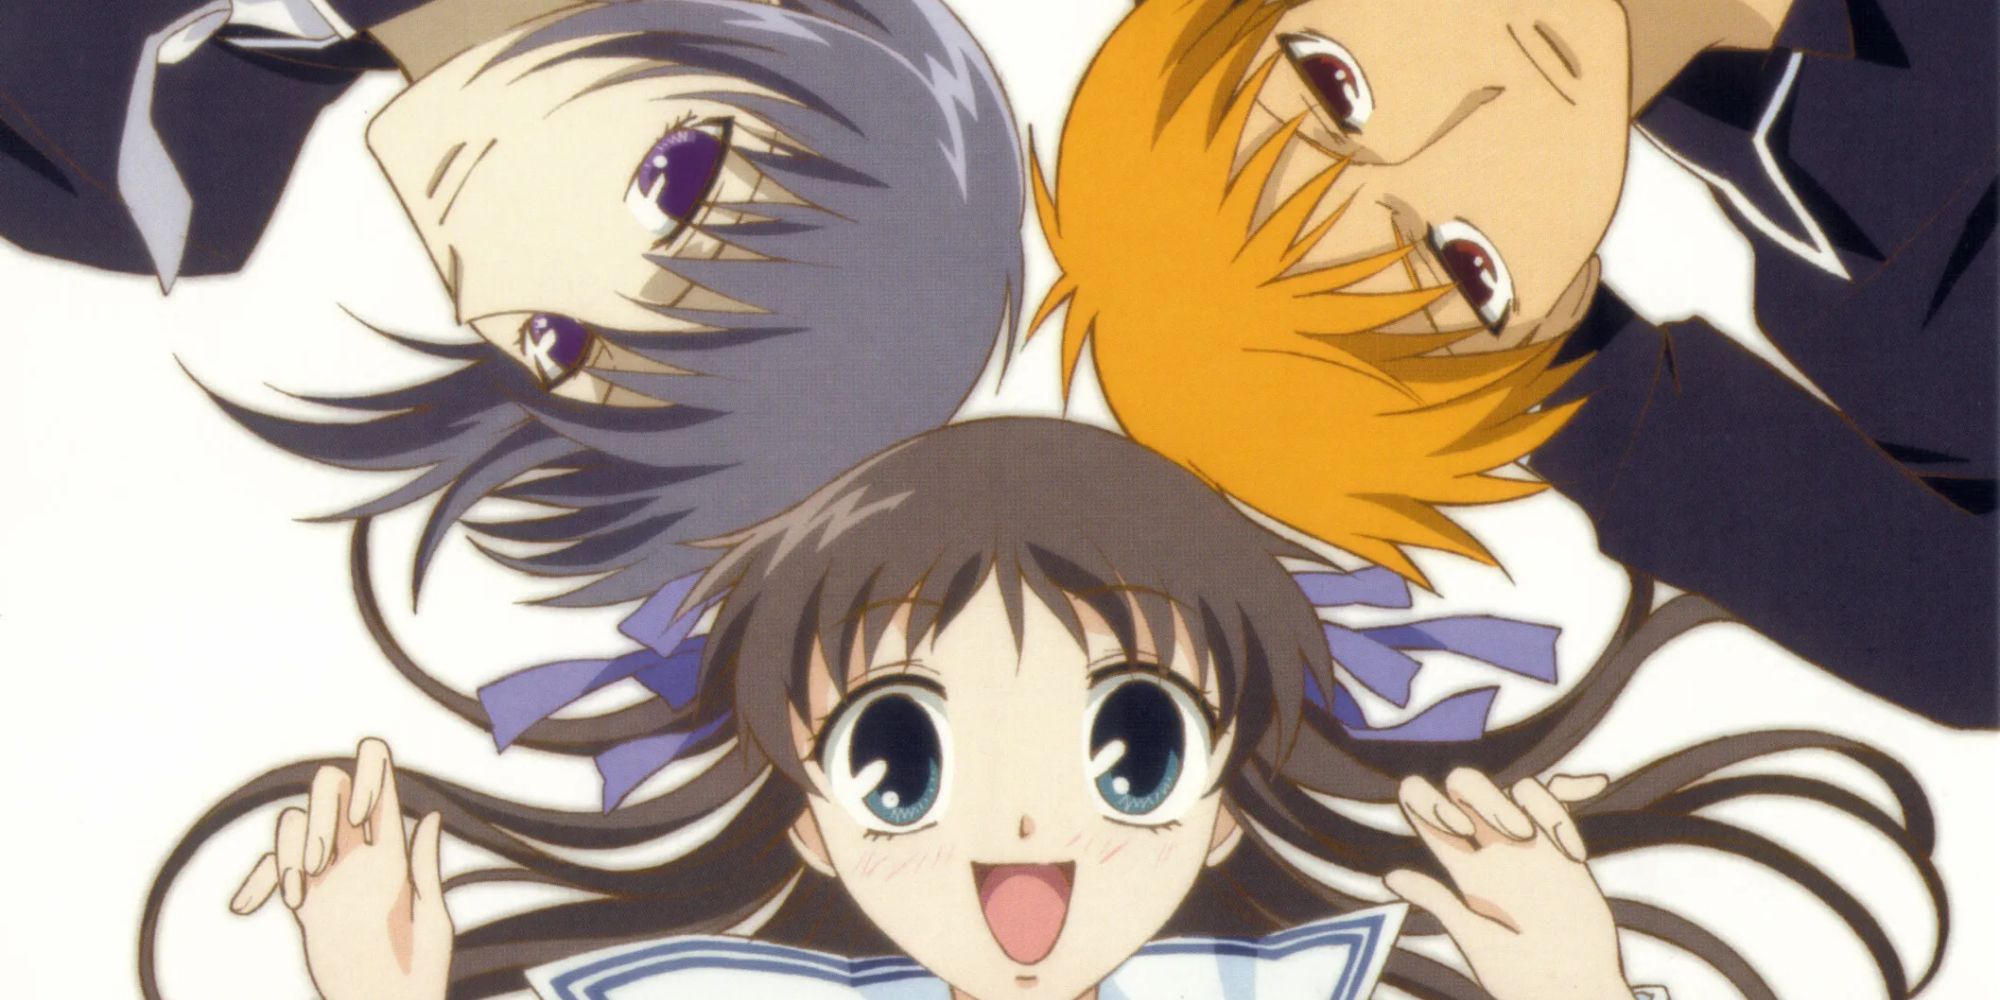 Characters from Fruits Basket